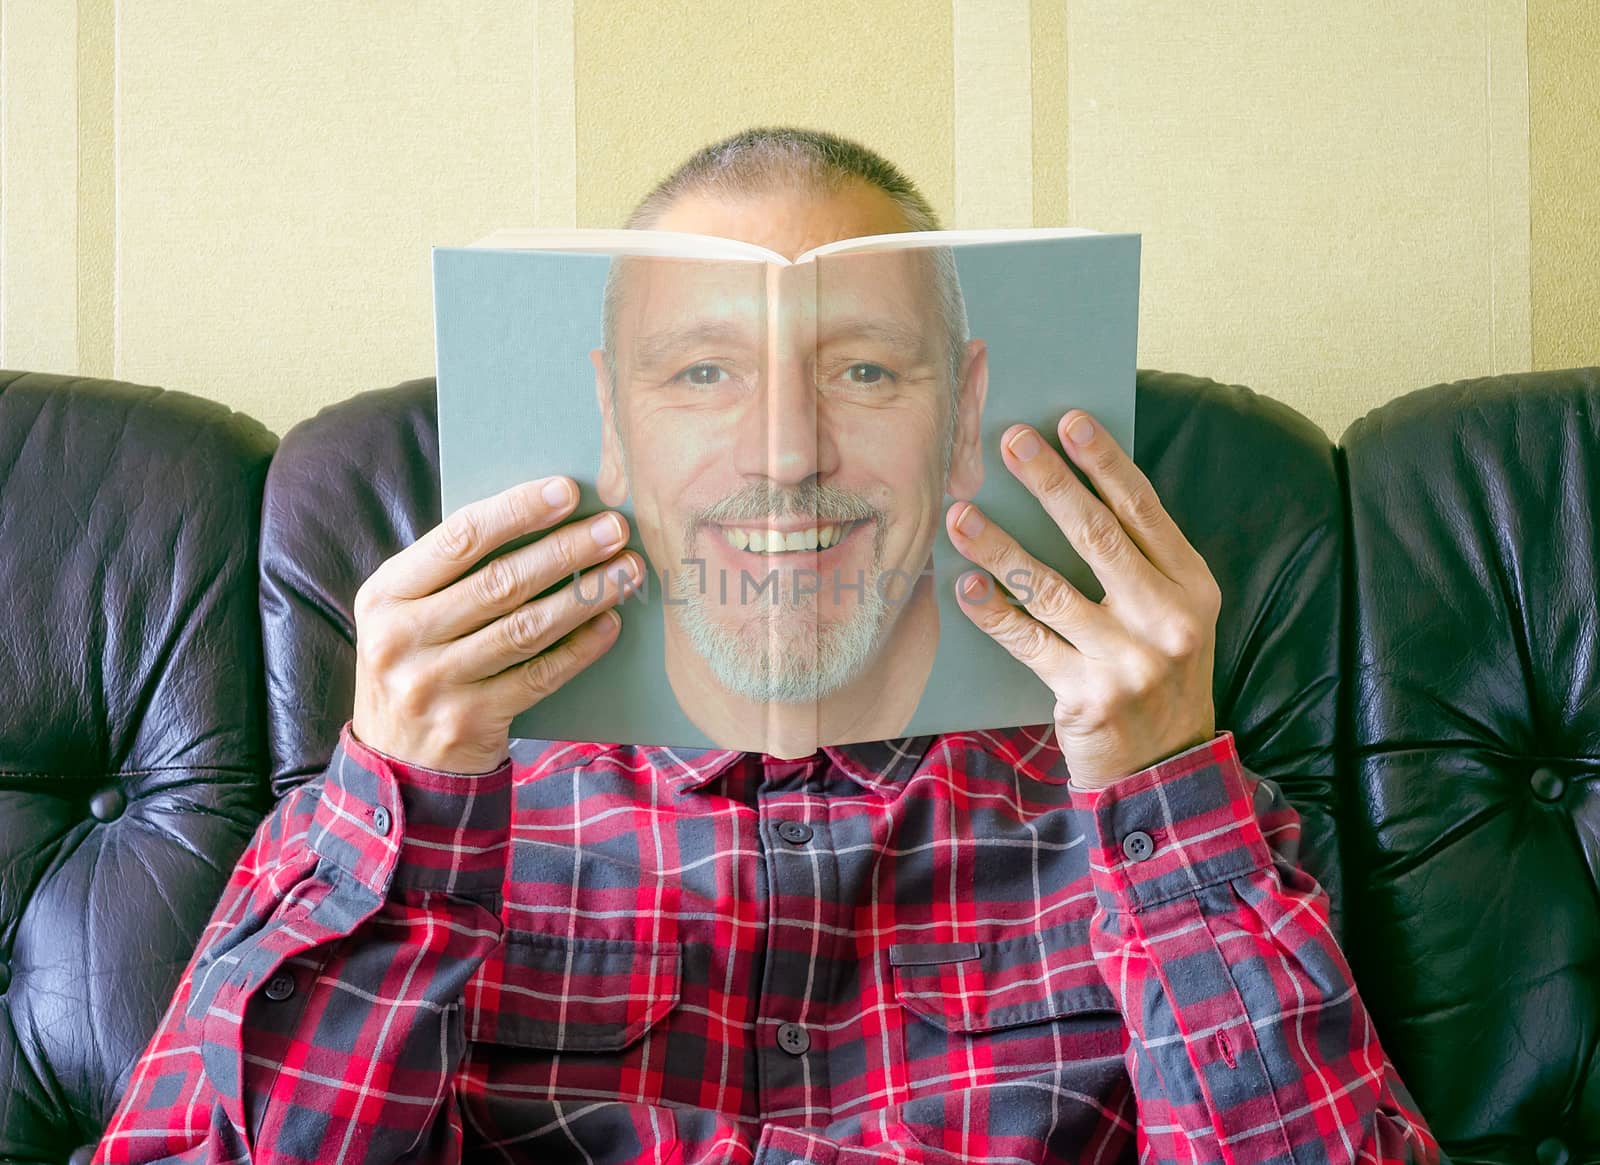 A man reading a book about himself, with his face seen on the cover.